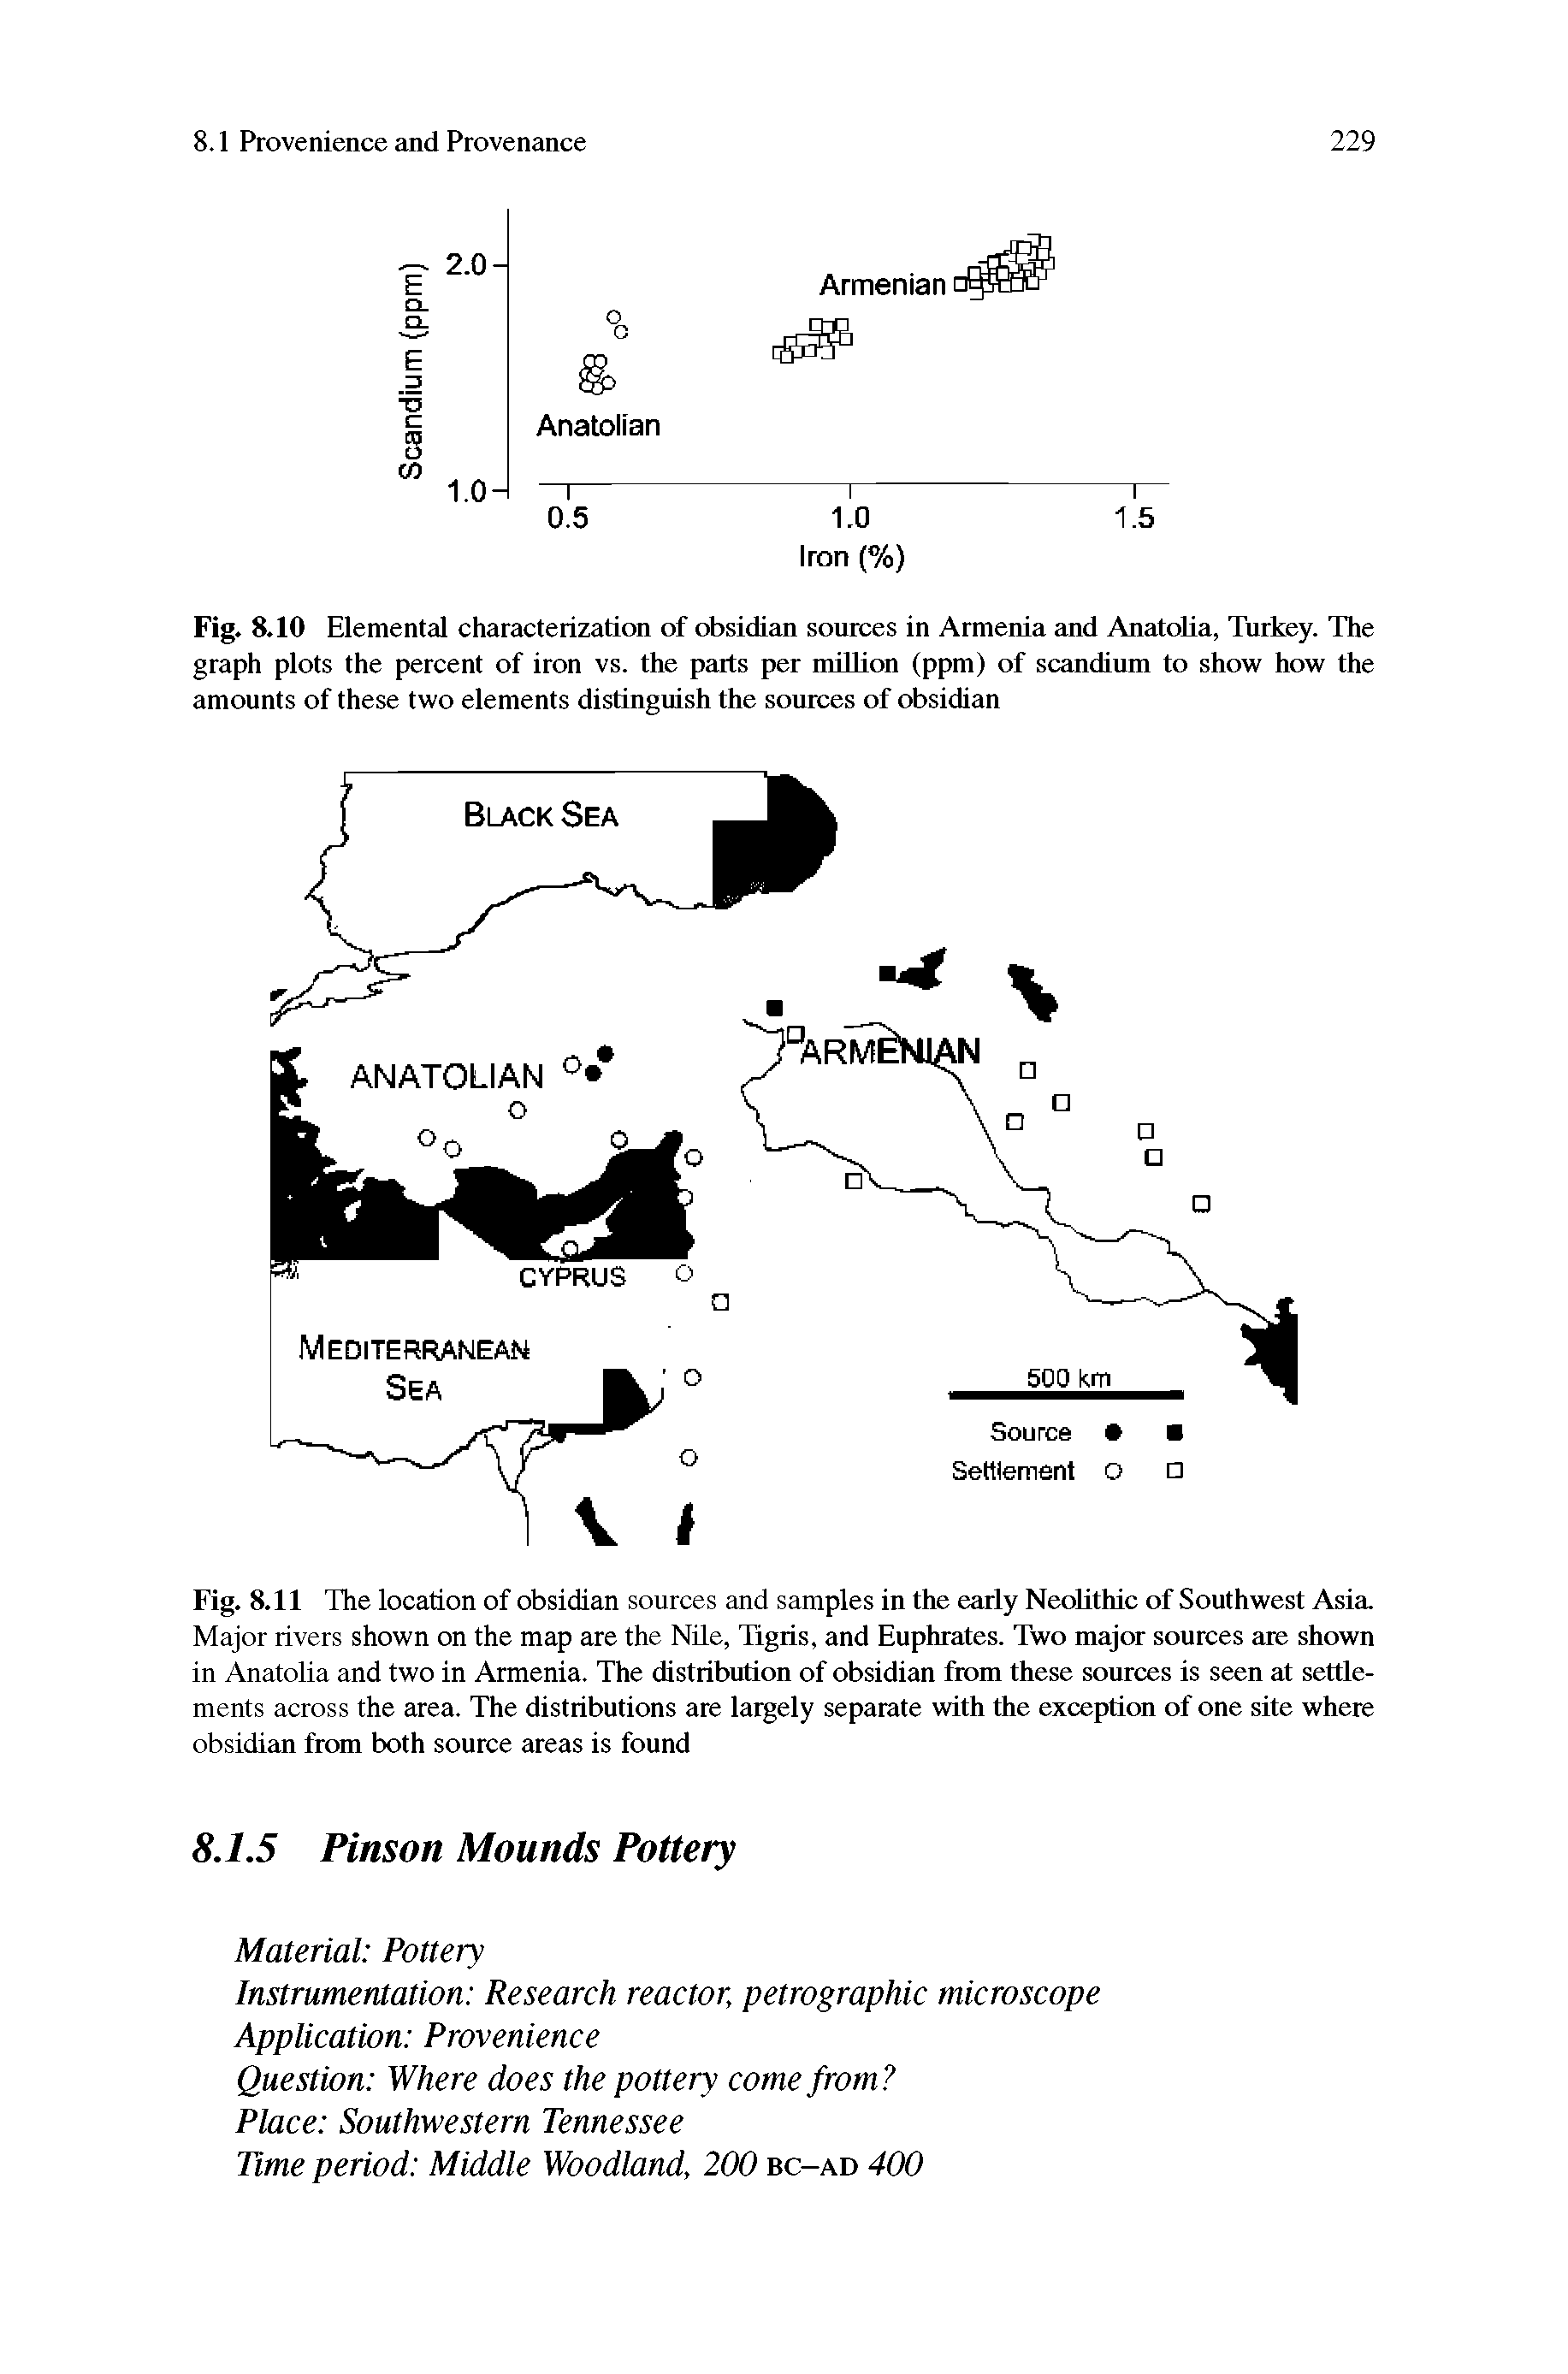 Fig. 8.11 The location of obsidian sources and samples in the early Neolithic of Southwest Asia. Major rivers shown on the map are the Nile, Tigris, and Euphrates. Two major sources are shown in Anatolia and two in Armenia. The distribution of obsidian from these sources is seen at settlements across the area. The distributions are largely separate with the exception of one site where obsidian from both source areas is found...